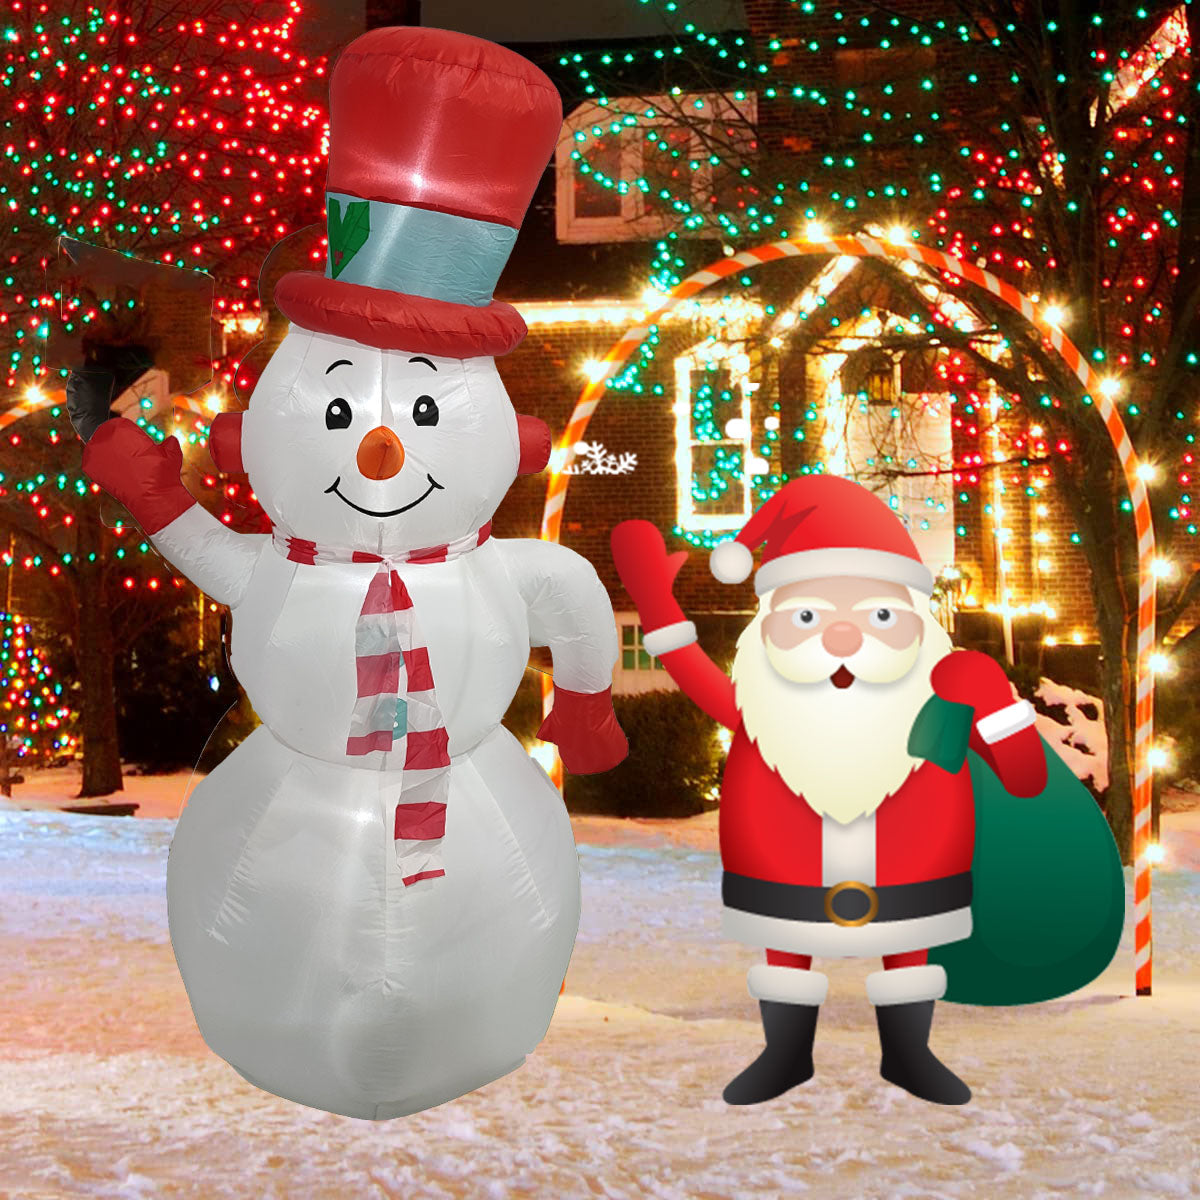 iFanze 6FT Christmas Inflatable Snowman with Build in LED Lights, Lighted Blow Up White Snowman for Indoor / Outdoor Xmas Holiday Decor, Light Up Lawn Yard Garden Decorations